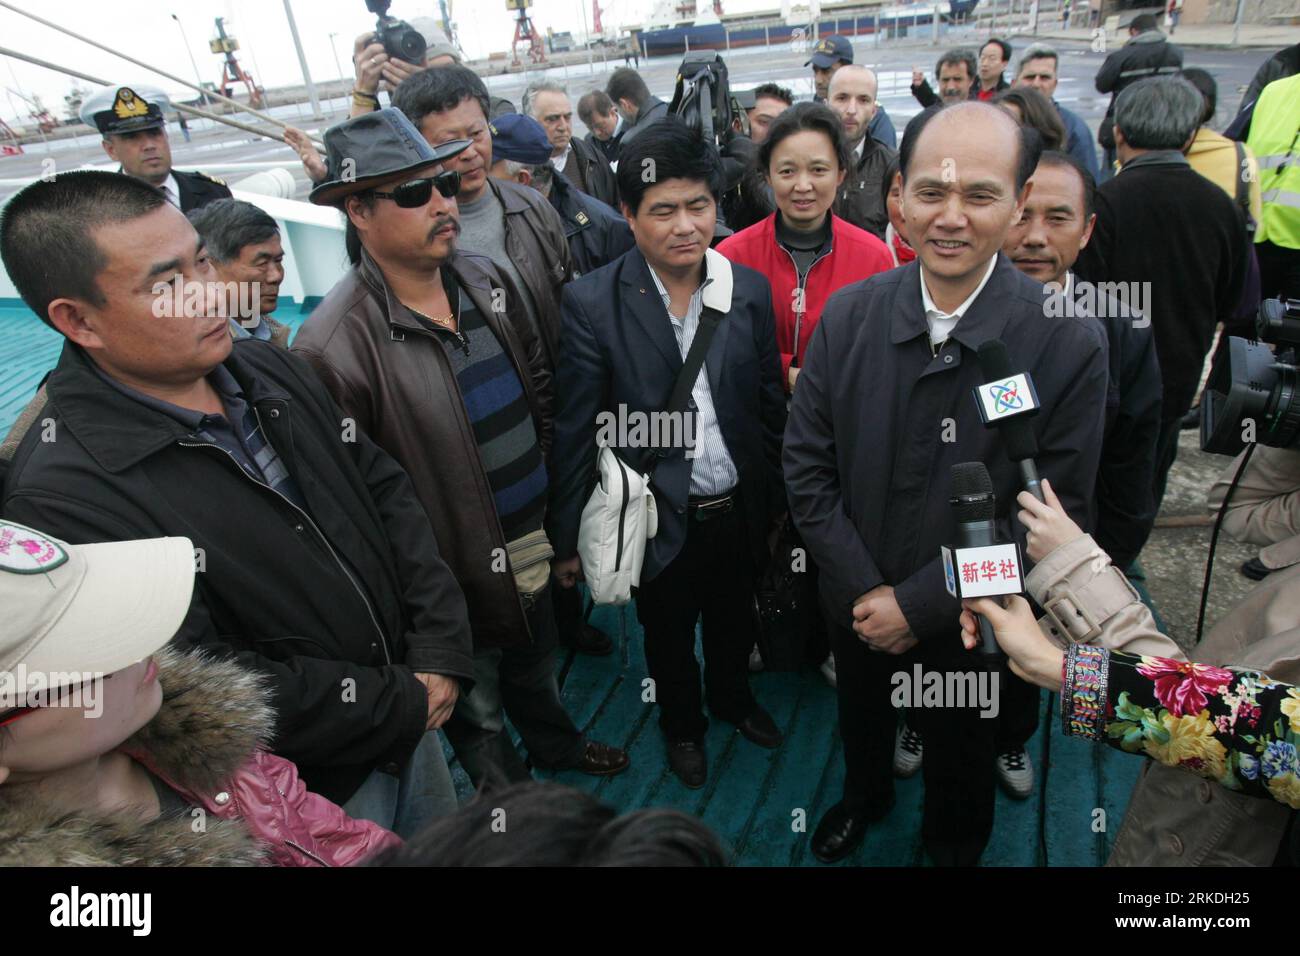 Bildnummer: 54948491  Datum: 24.02.2011  Copyright: imago/Xinhua (110224) -- CRETE, Feb. 24, 2011, Xinhua -- Chinese ambassador to Greece Luo Linquan (R) talks to Chinese nationals evacuated from Libya at the port of Heraklion, in the southern Greek island of Crete, Feb. 24, 2011. More than 4,100 Chinese nationals on two Greek merchant vessels chartered by the Chinese government arrived here Thursday from Libya s Benghazi. (Xinhua/Marios Lolos) GREECE-CHINA-LIBYA-EVACUEES-VESSELS-ARRIVAL PUBLICATIONxNOTxINxCHN Politik premiumd kbdig xkg 2011 quer   o0  People    Bildnummer 54948491 Date 24 02 Stock Photo